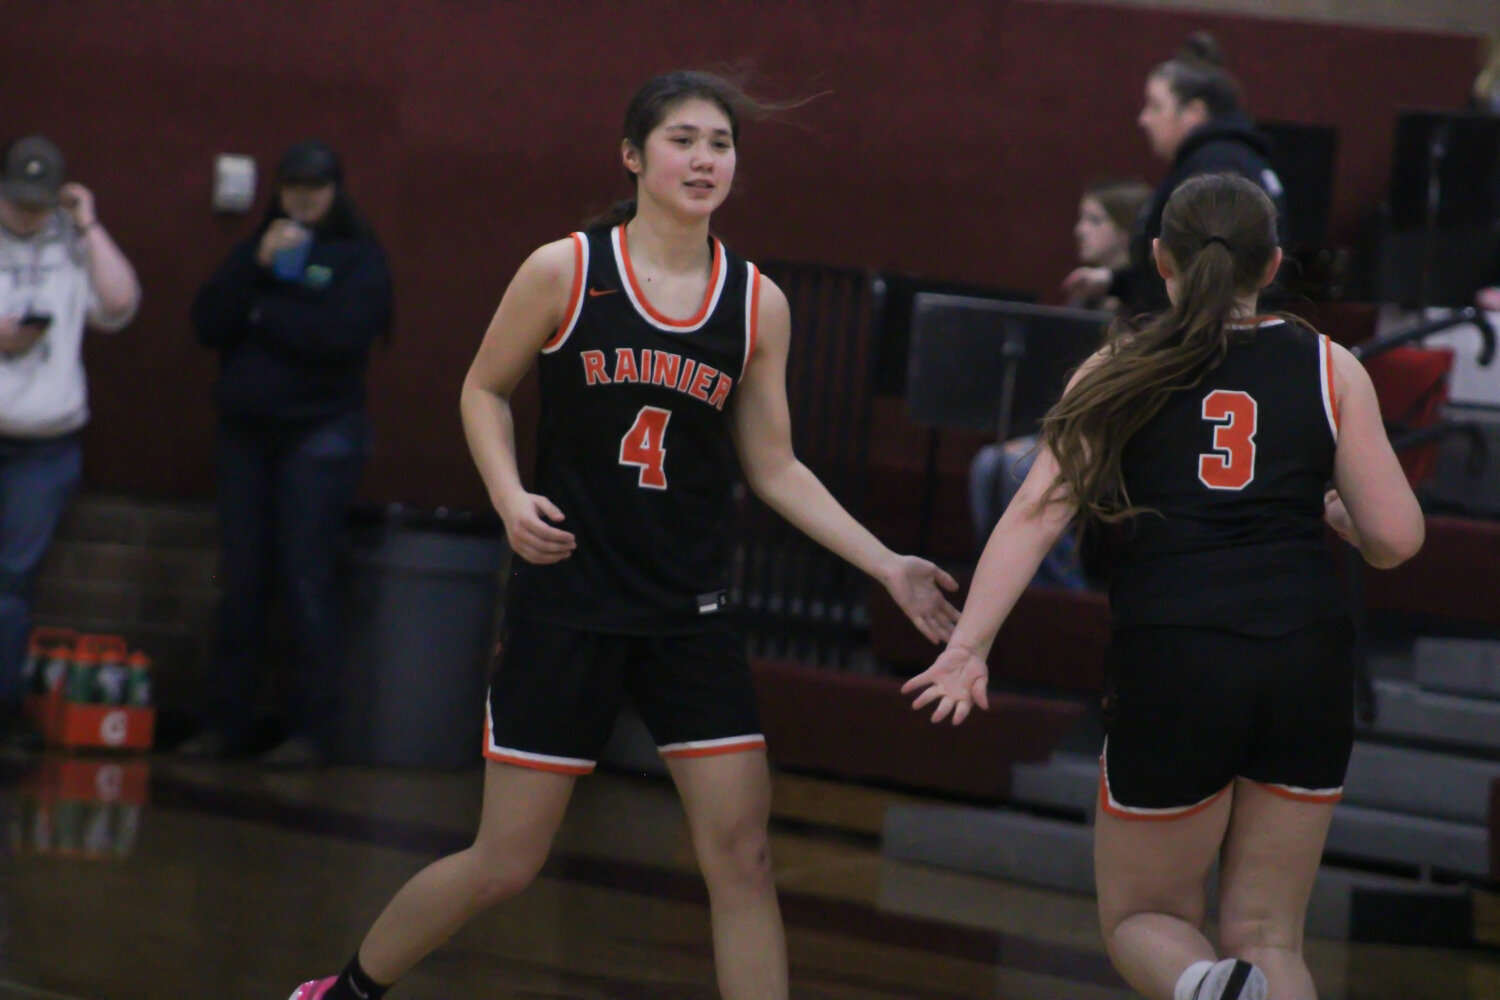 Angelica Askey (4) and Brooklynn Swenson (3) high five each other after scoring a basket against Raymond-South Bend on Feb. 6.